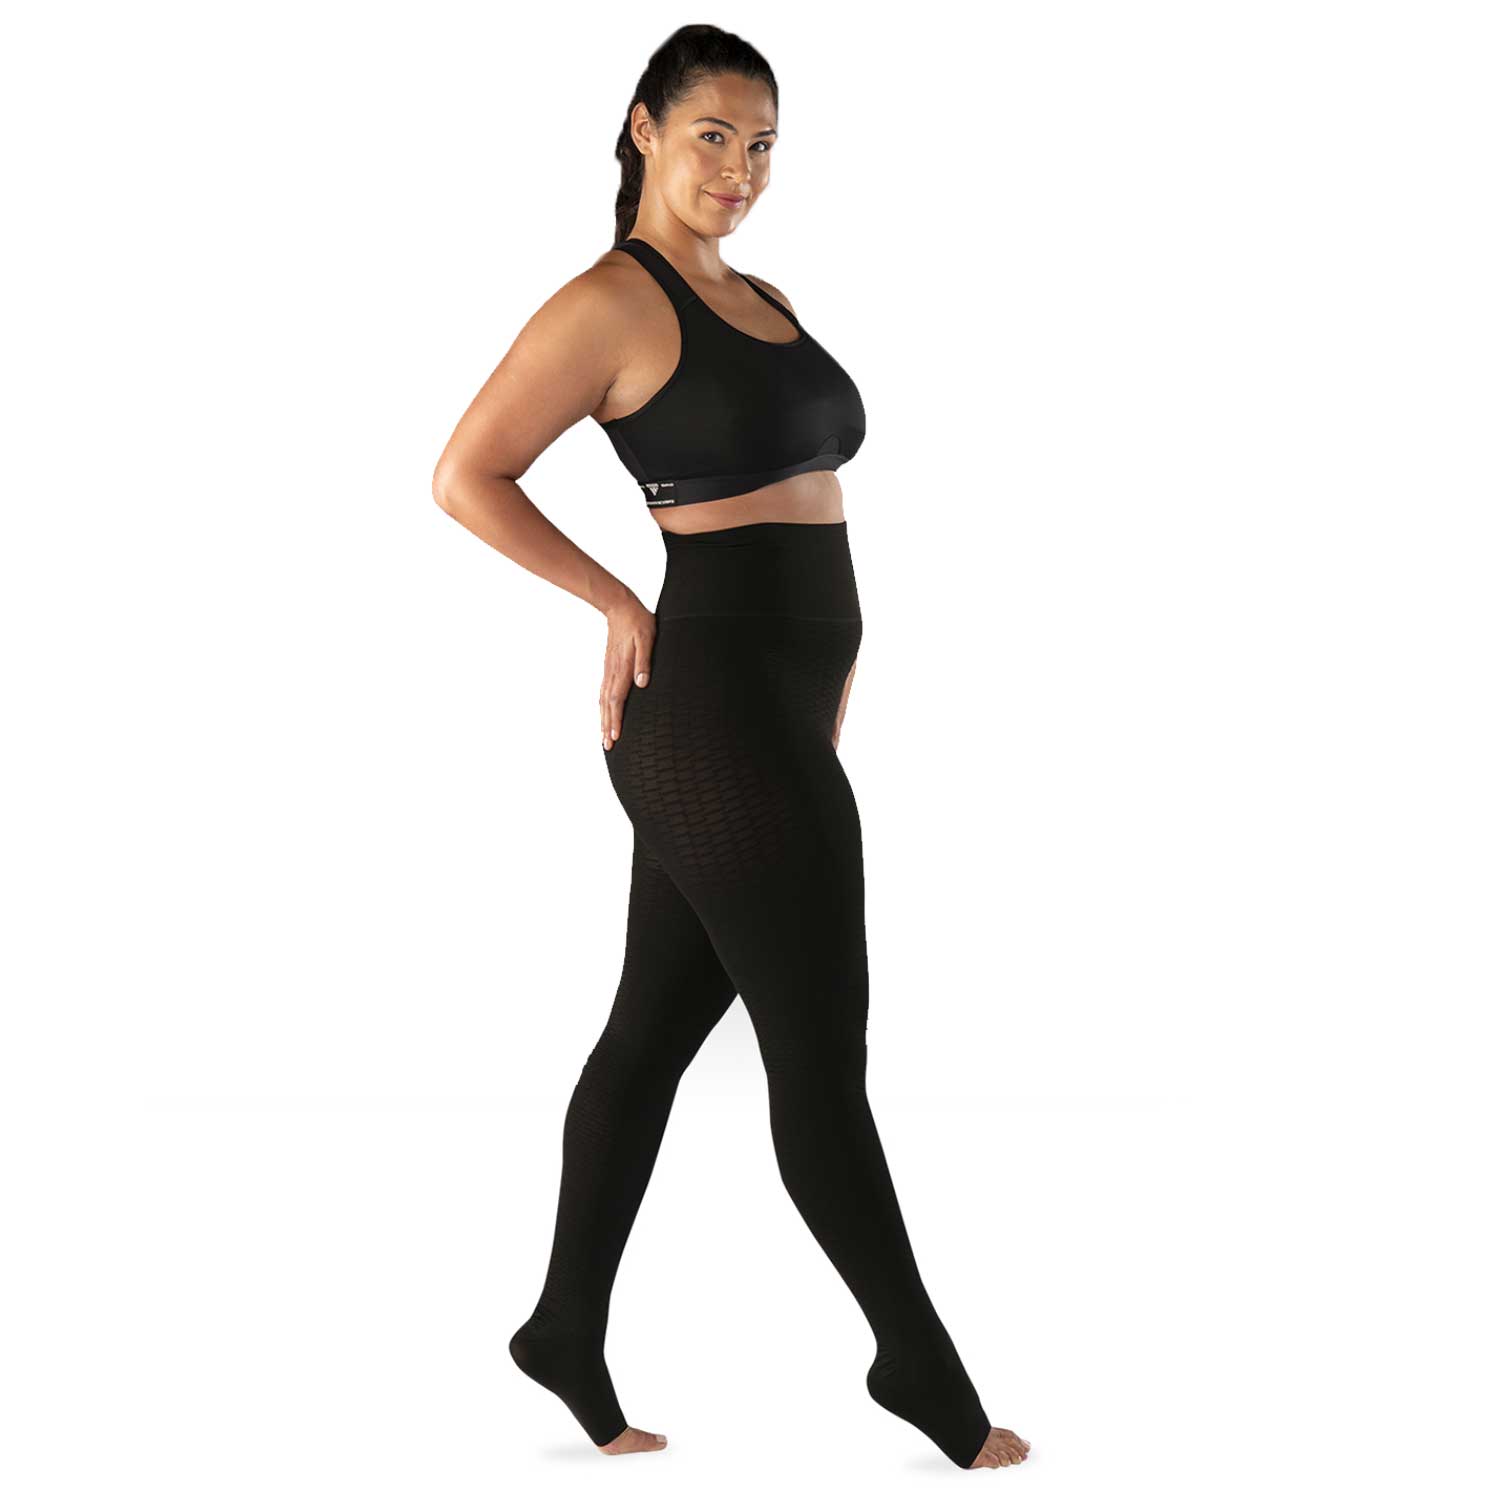 CLITCHY Western Wear Legging Price in India - Buy CLITCHY Western Wear  Legging online at Flipkart.com